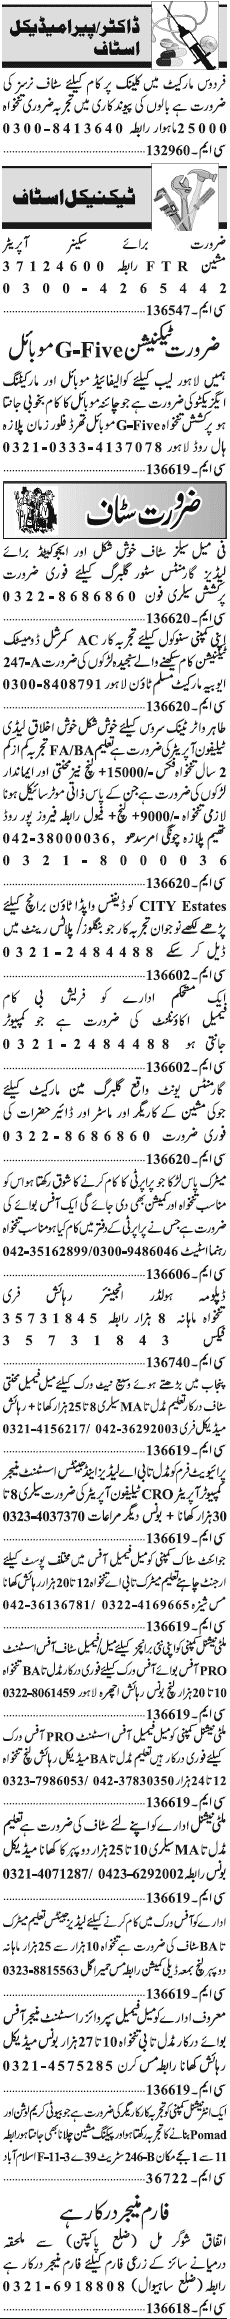 Classified Lahore Jang Misc. Jobs